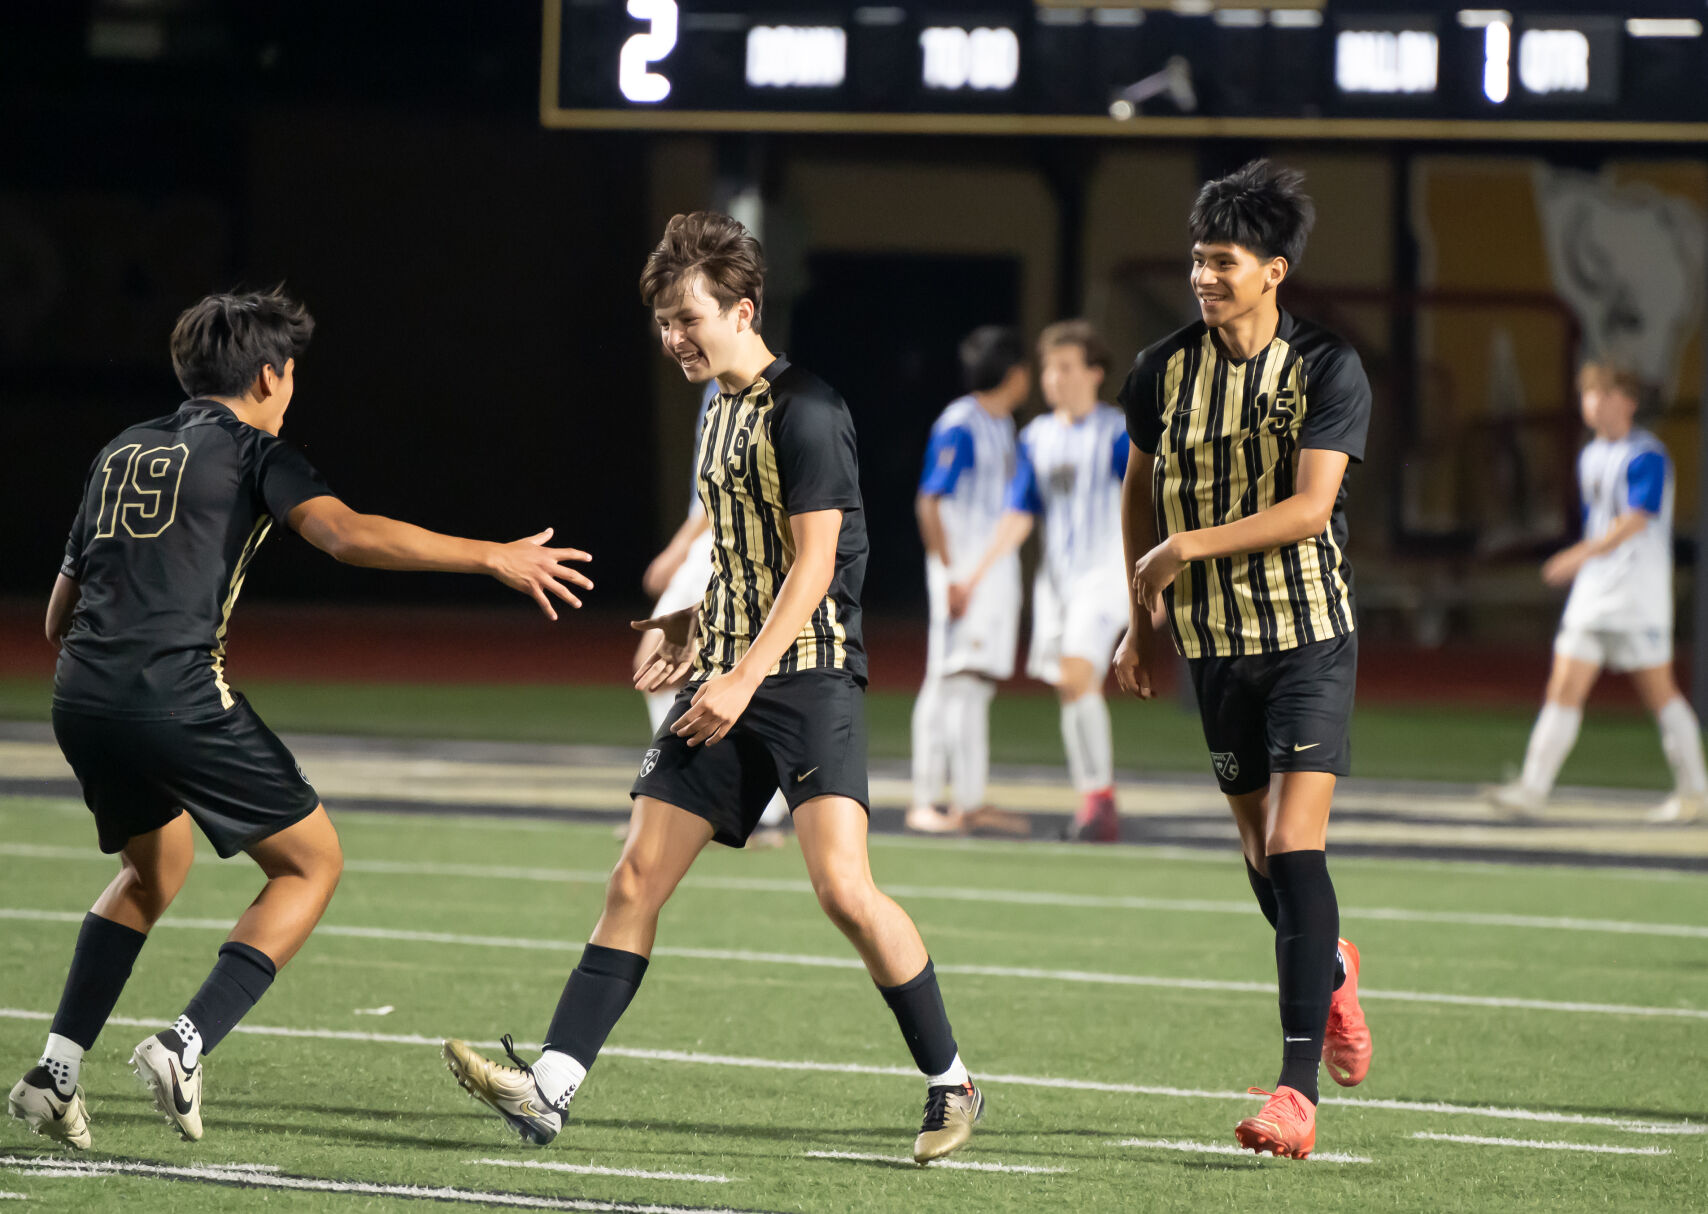 McAlester Buffaloes Secure Dominant 3-0 Victory over Noble Bears in District Matchup